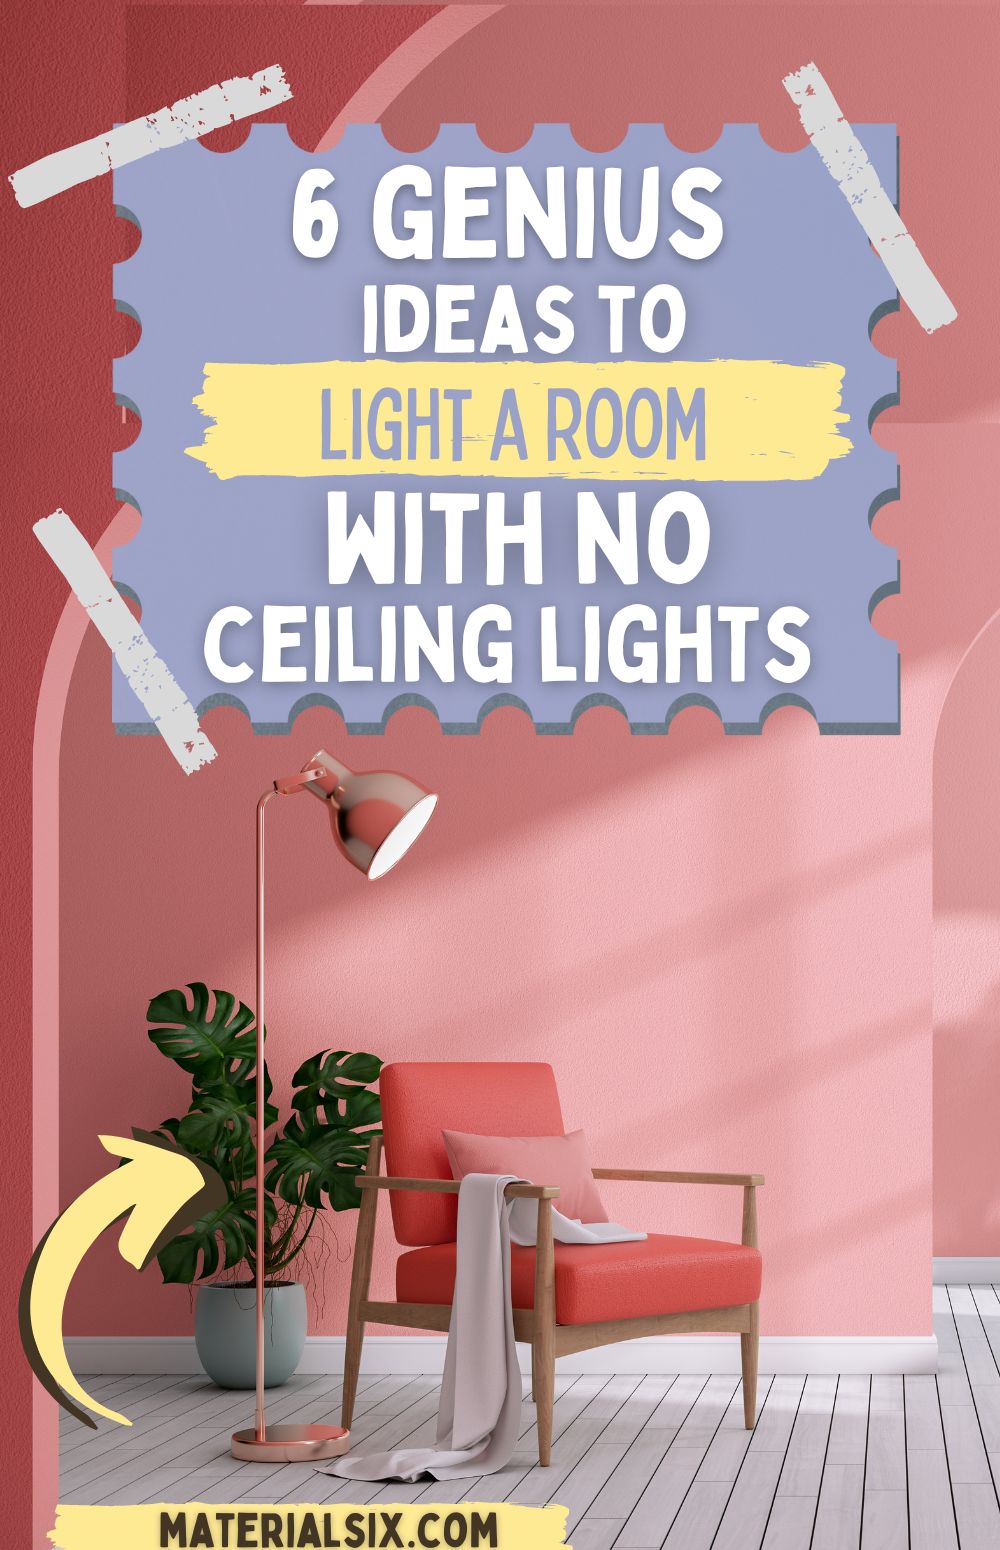 How to Light a Room With No Ceiling Lights (6 Genius Ideas)